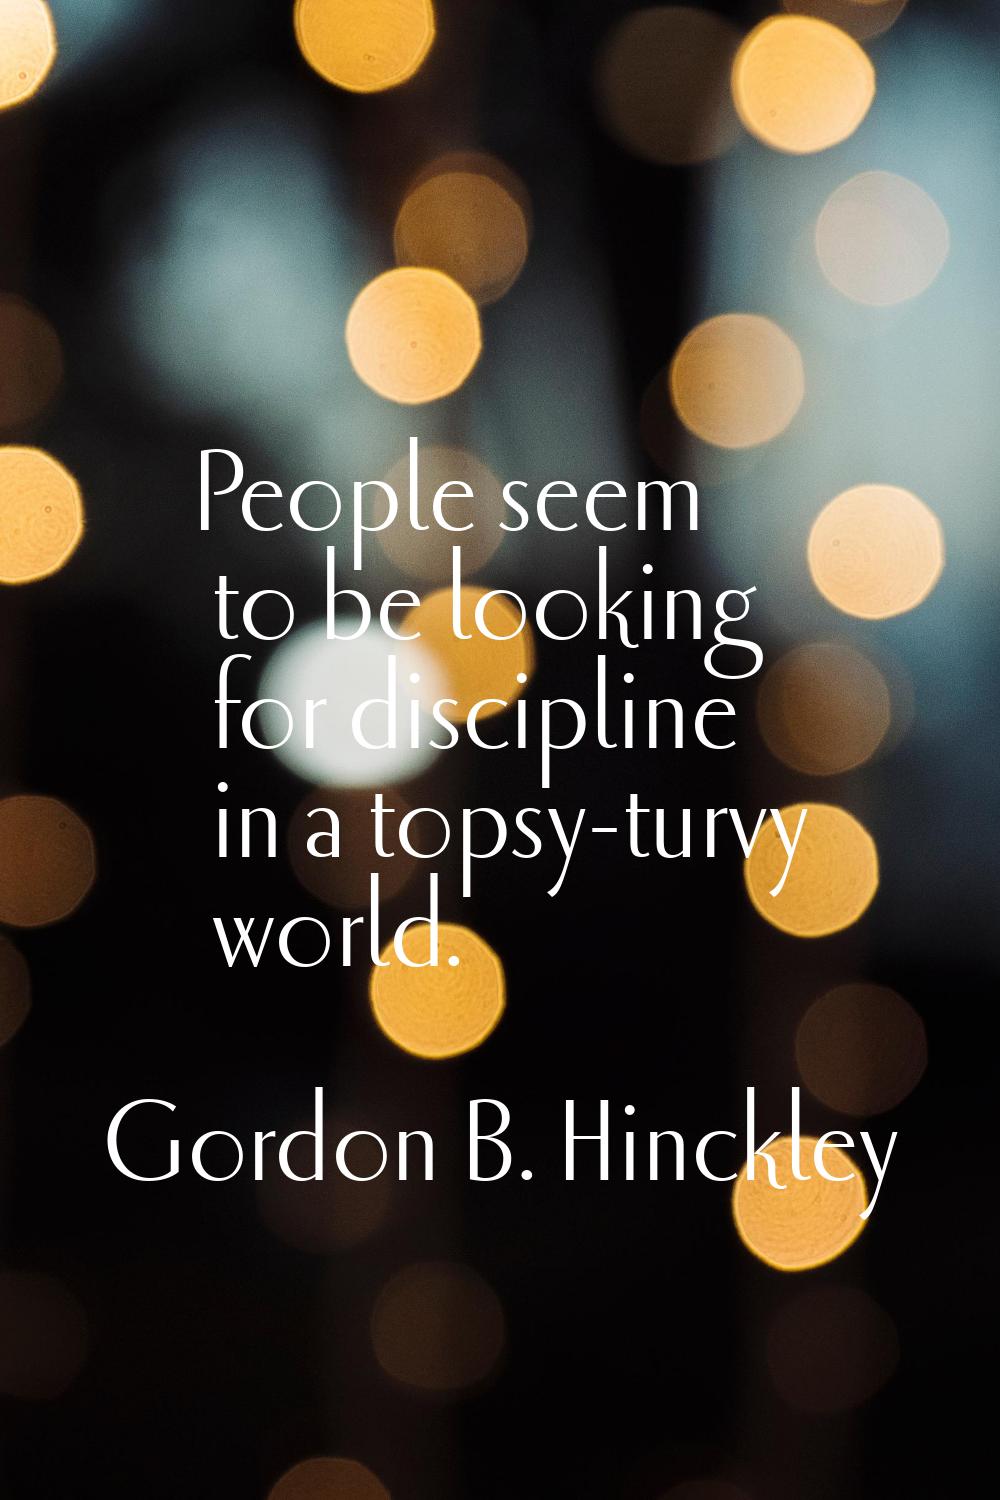 People seem to be looking for discipline in a topsy-turvy world.